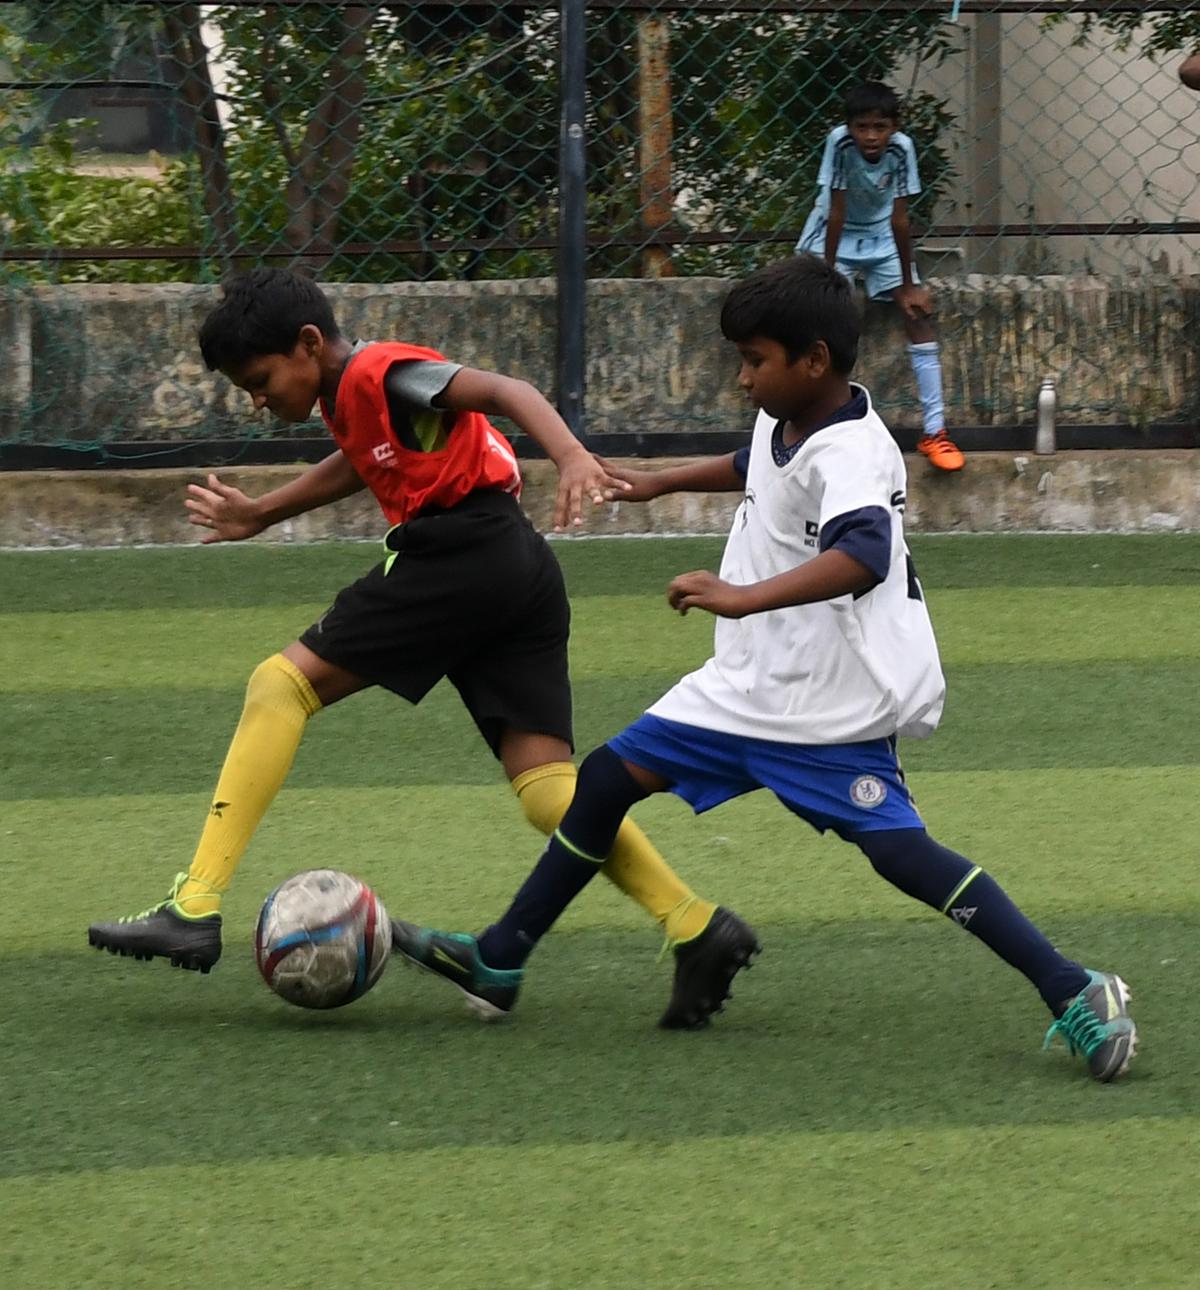 North Chennai’s vision for 2030: A football team that will represent India at the World Cup